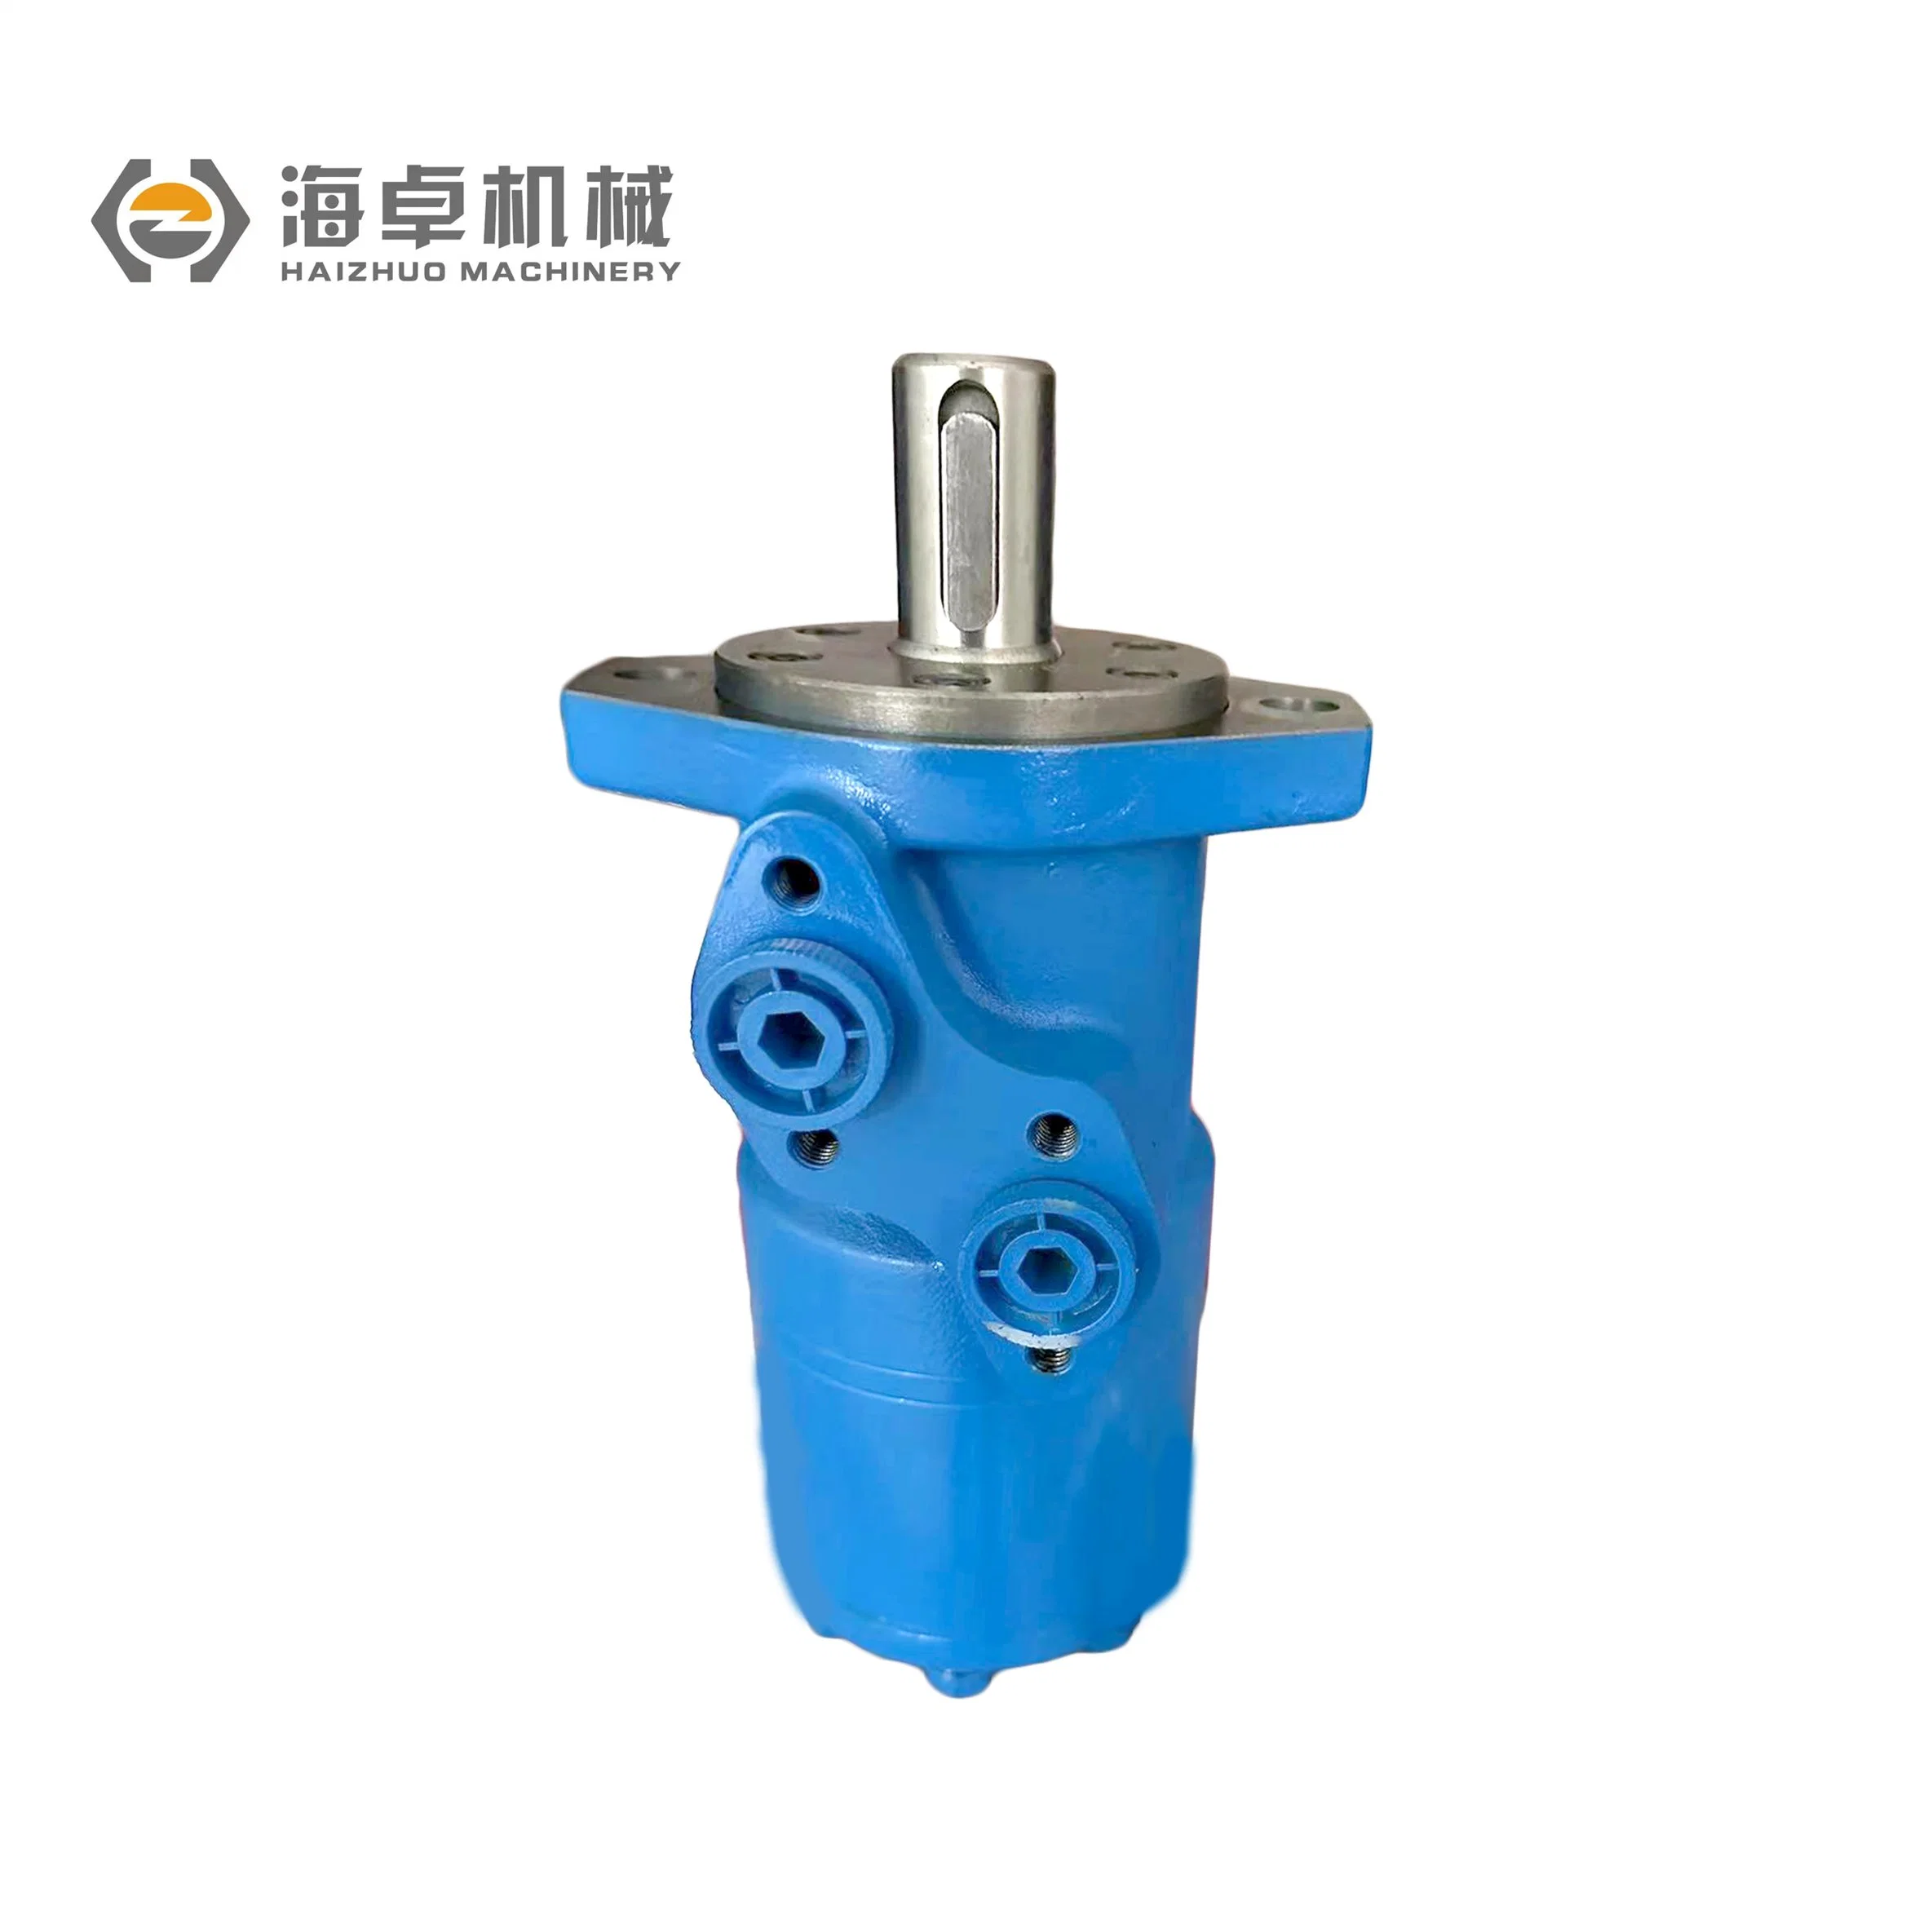 Bm3 Axial Flow Distribution Hydraulic Cycloid Motor for Special Vehicles